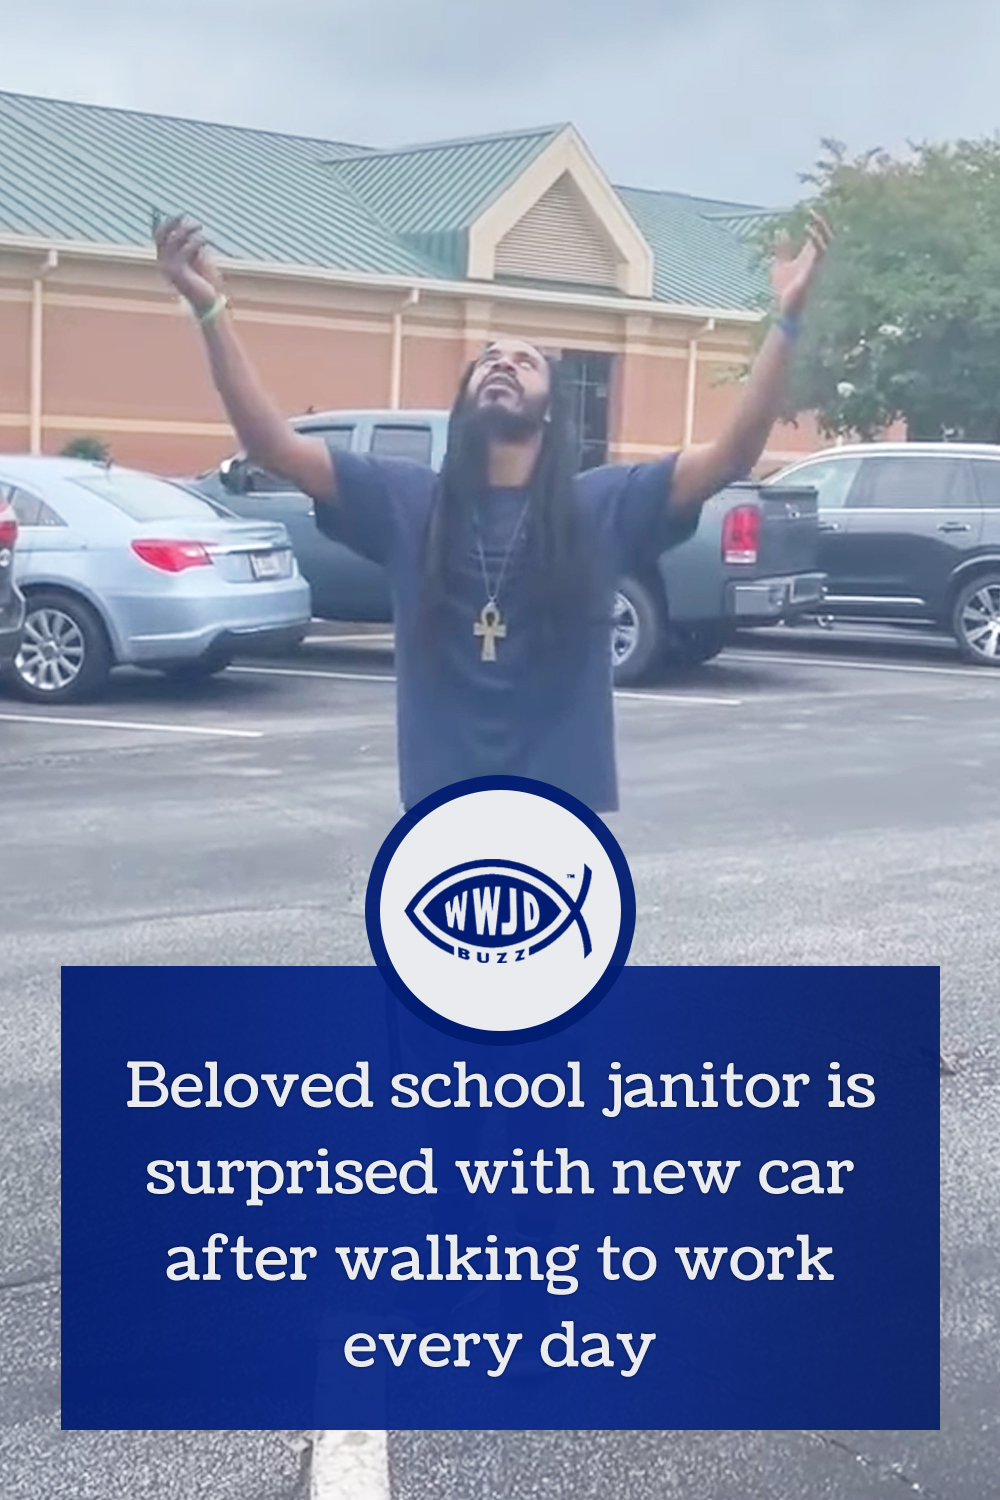 Beloved school janitor is surprised with new car after walking to work every day